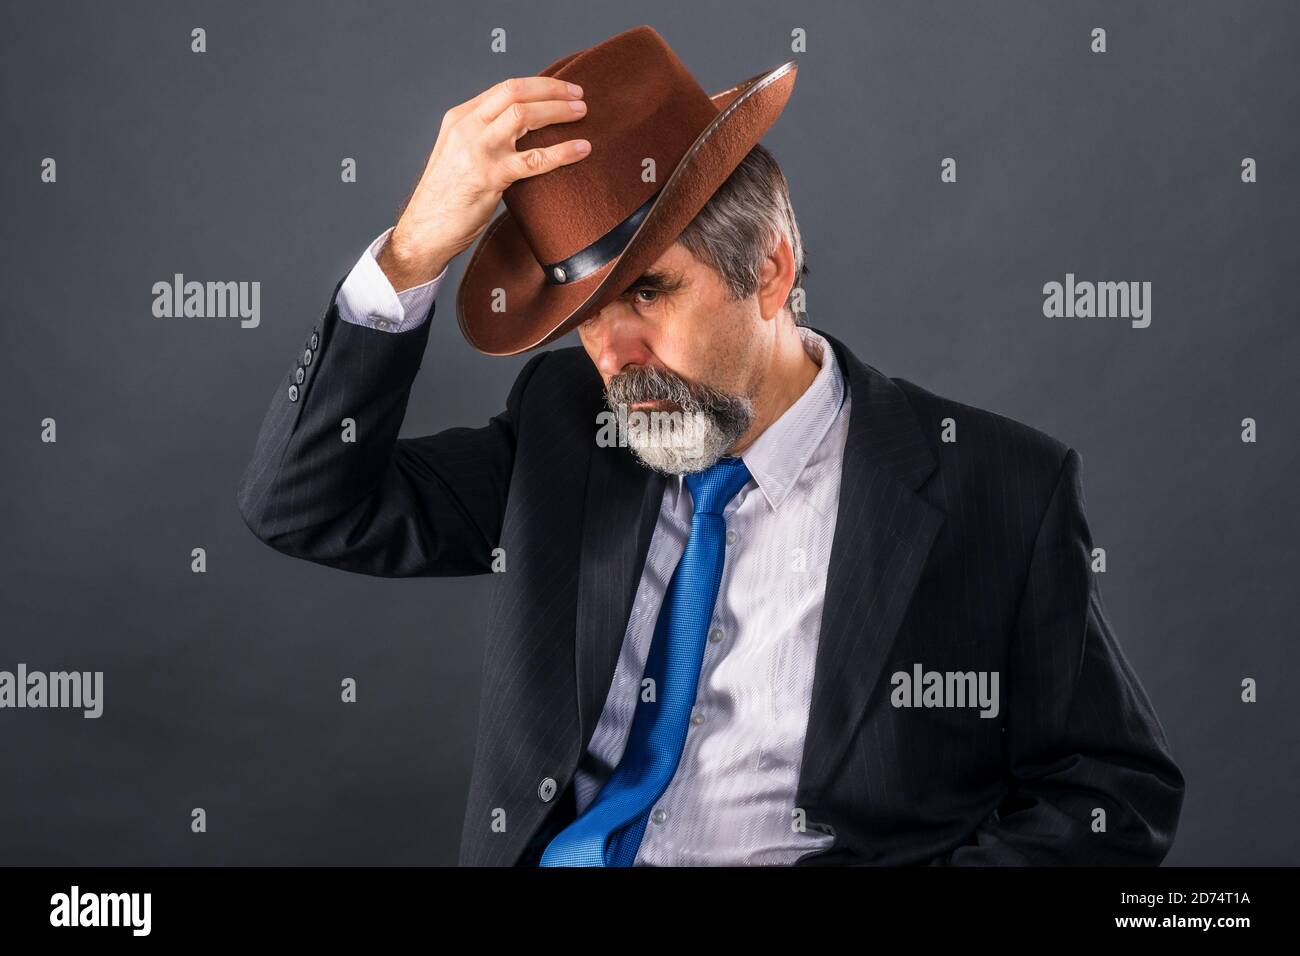 Elderly dandy man in a suit with a tie takes off his hat for a greeting Stock Photo